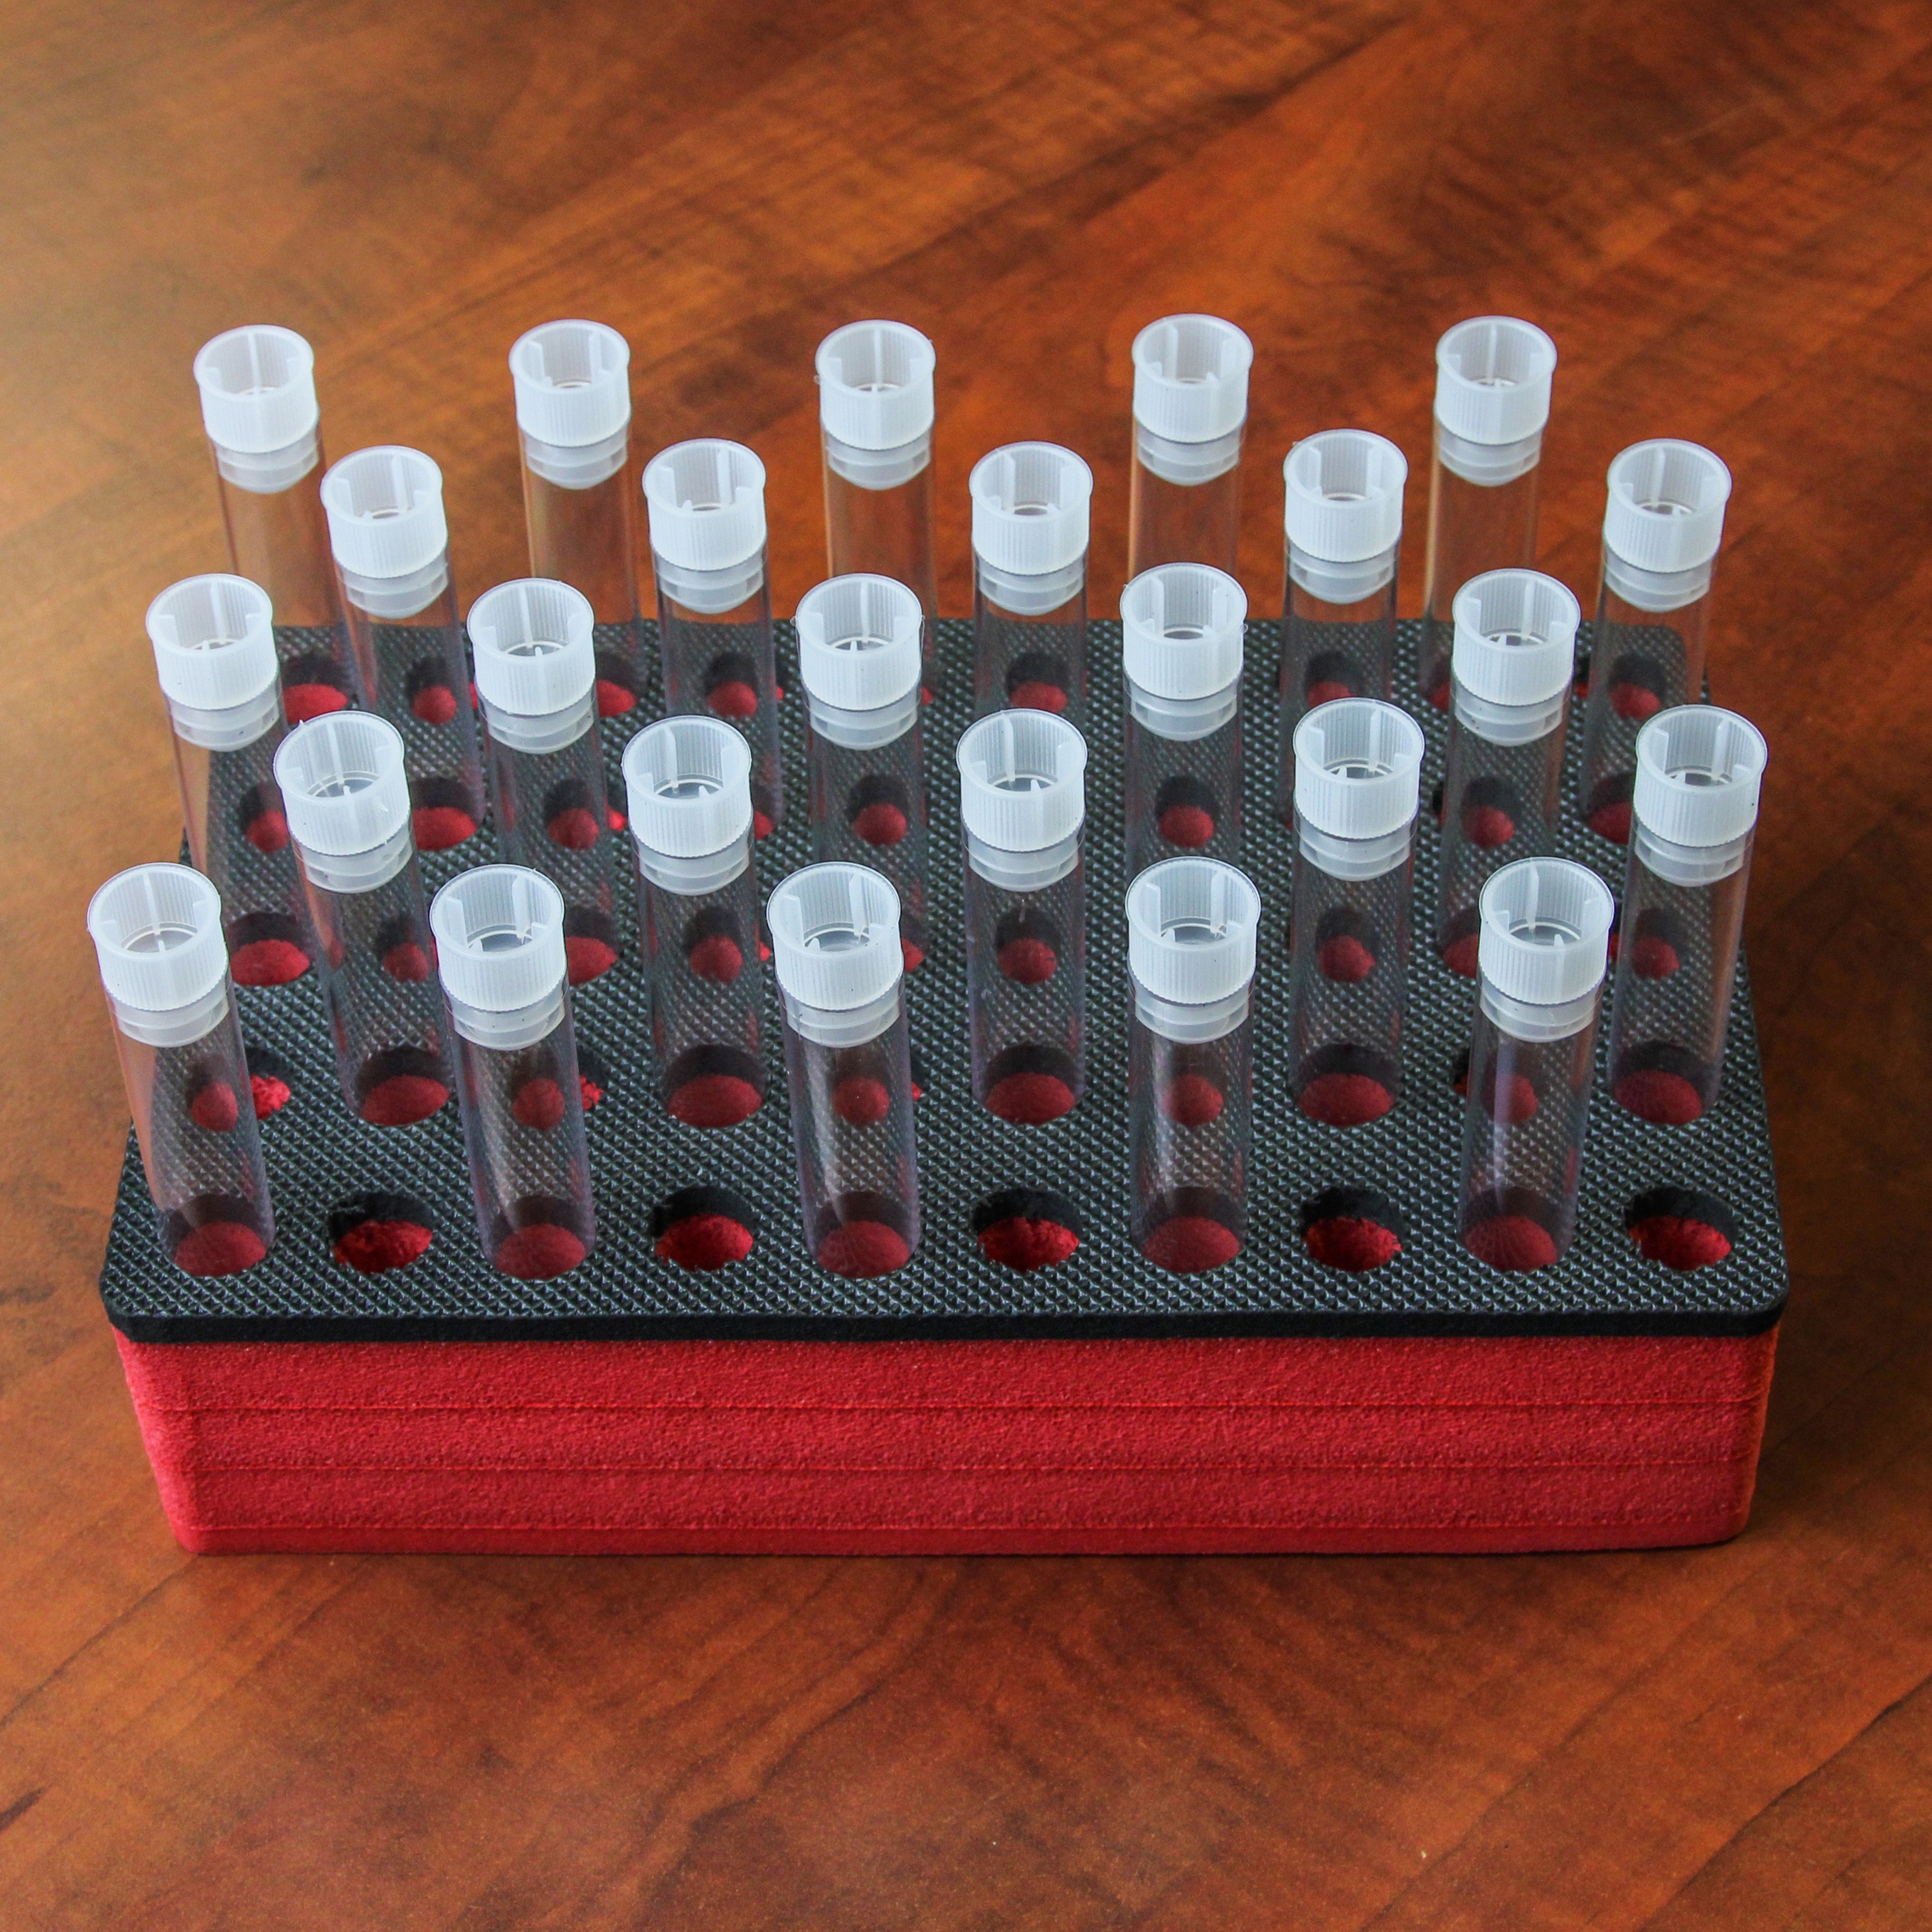 Polar Whale Test Tube Rack Red and Black Foam Storage Rack Organizer Stand Transport Holds 50 Tubes Fits up to 15mm Diameter